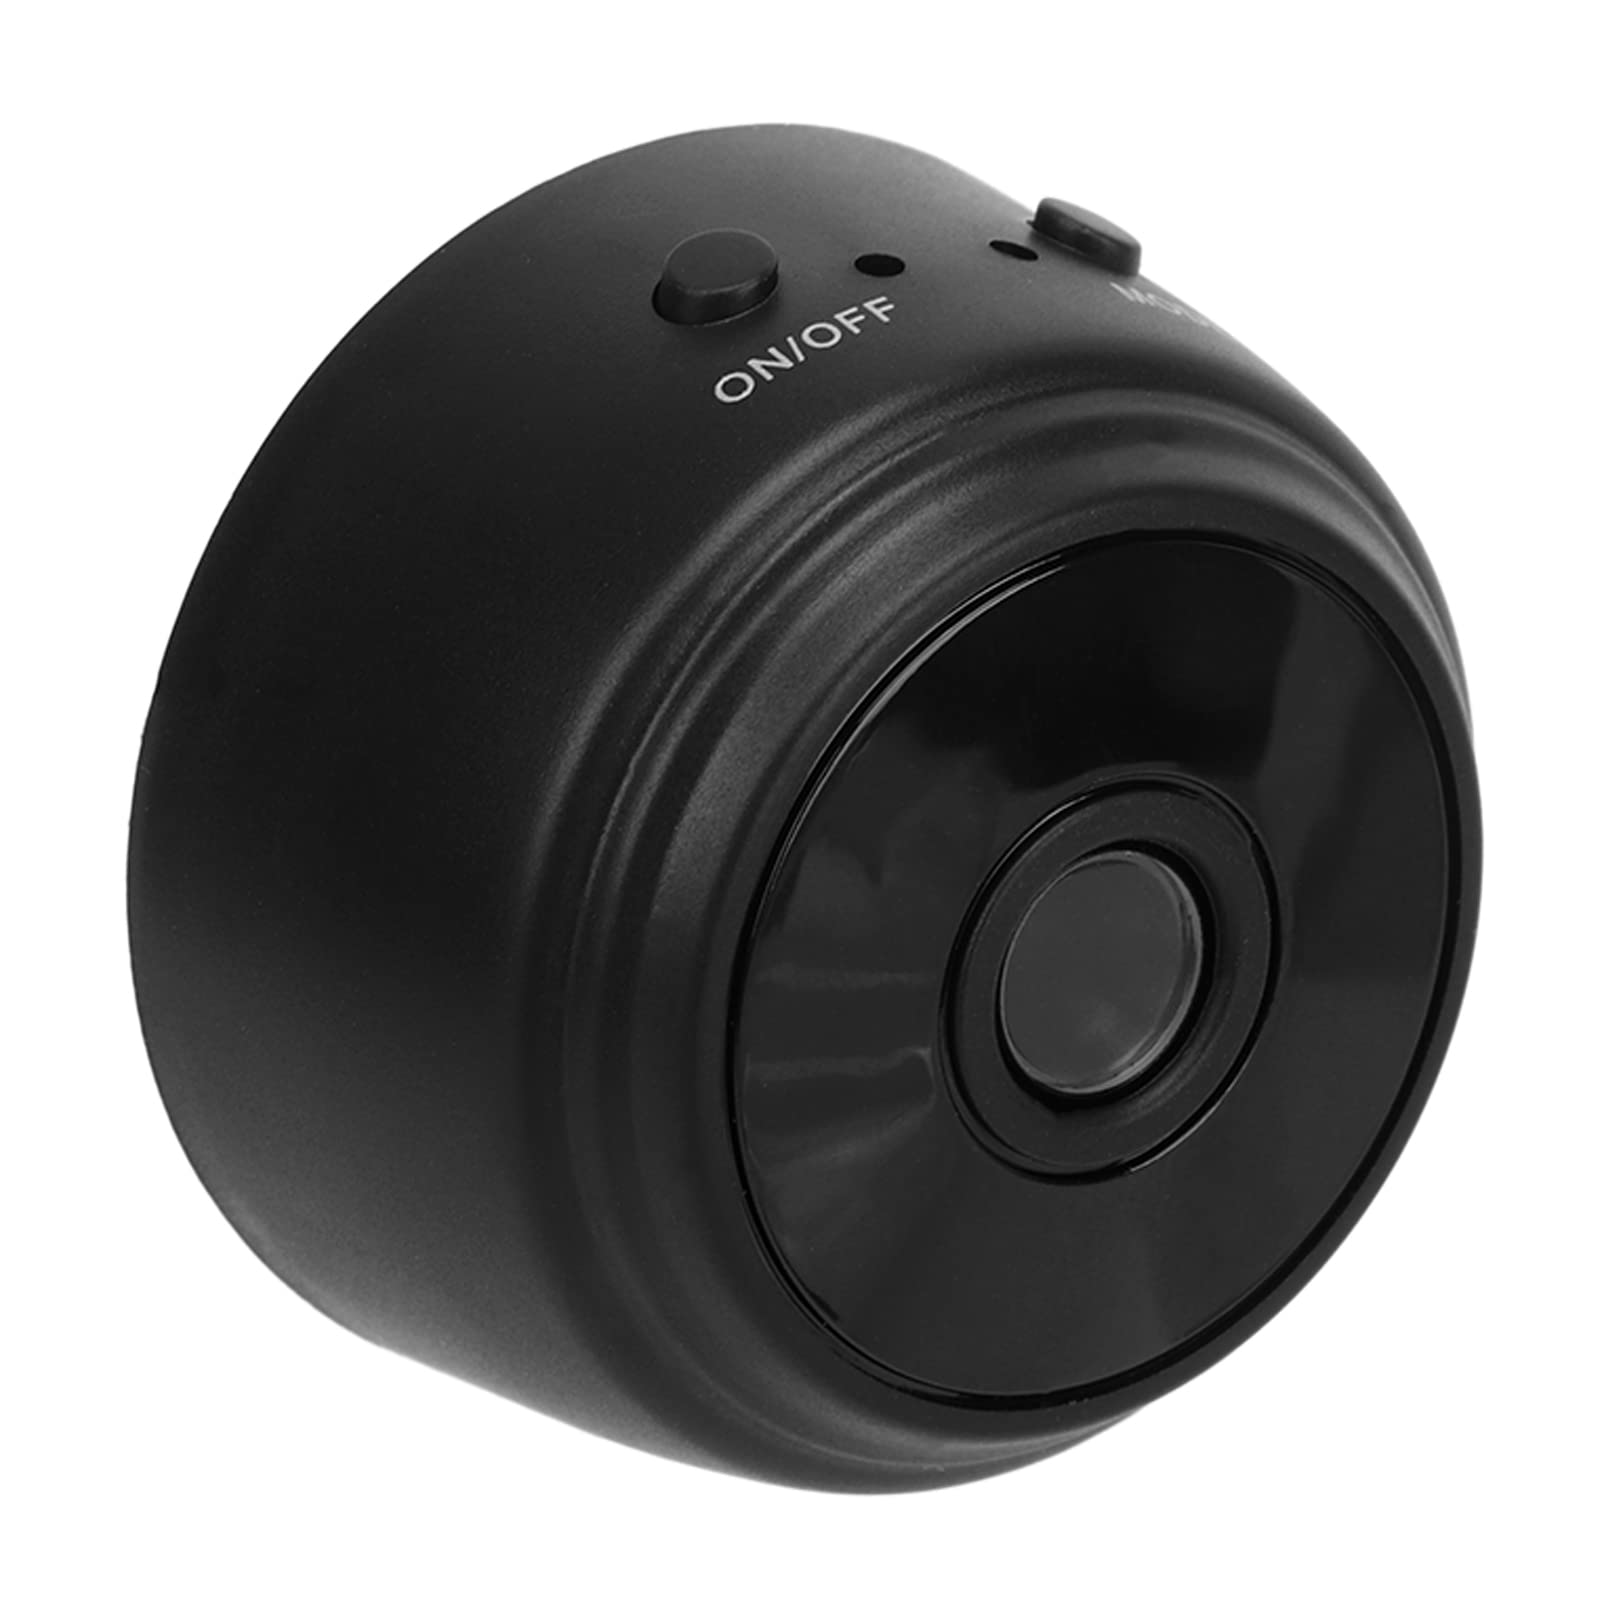 A9 Mini Camera - Ultimate HD Surveillance with WiFi, Magnetic Back Cover, and Built-in Battery for Home and Office Security